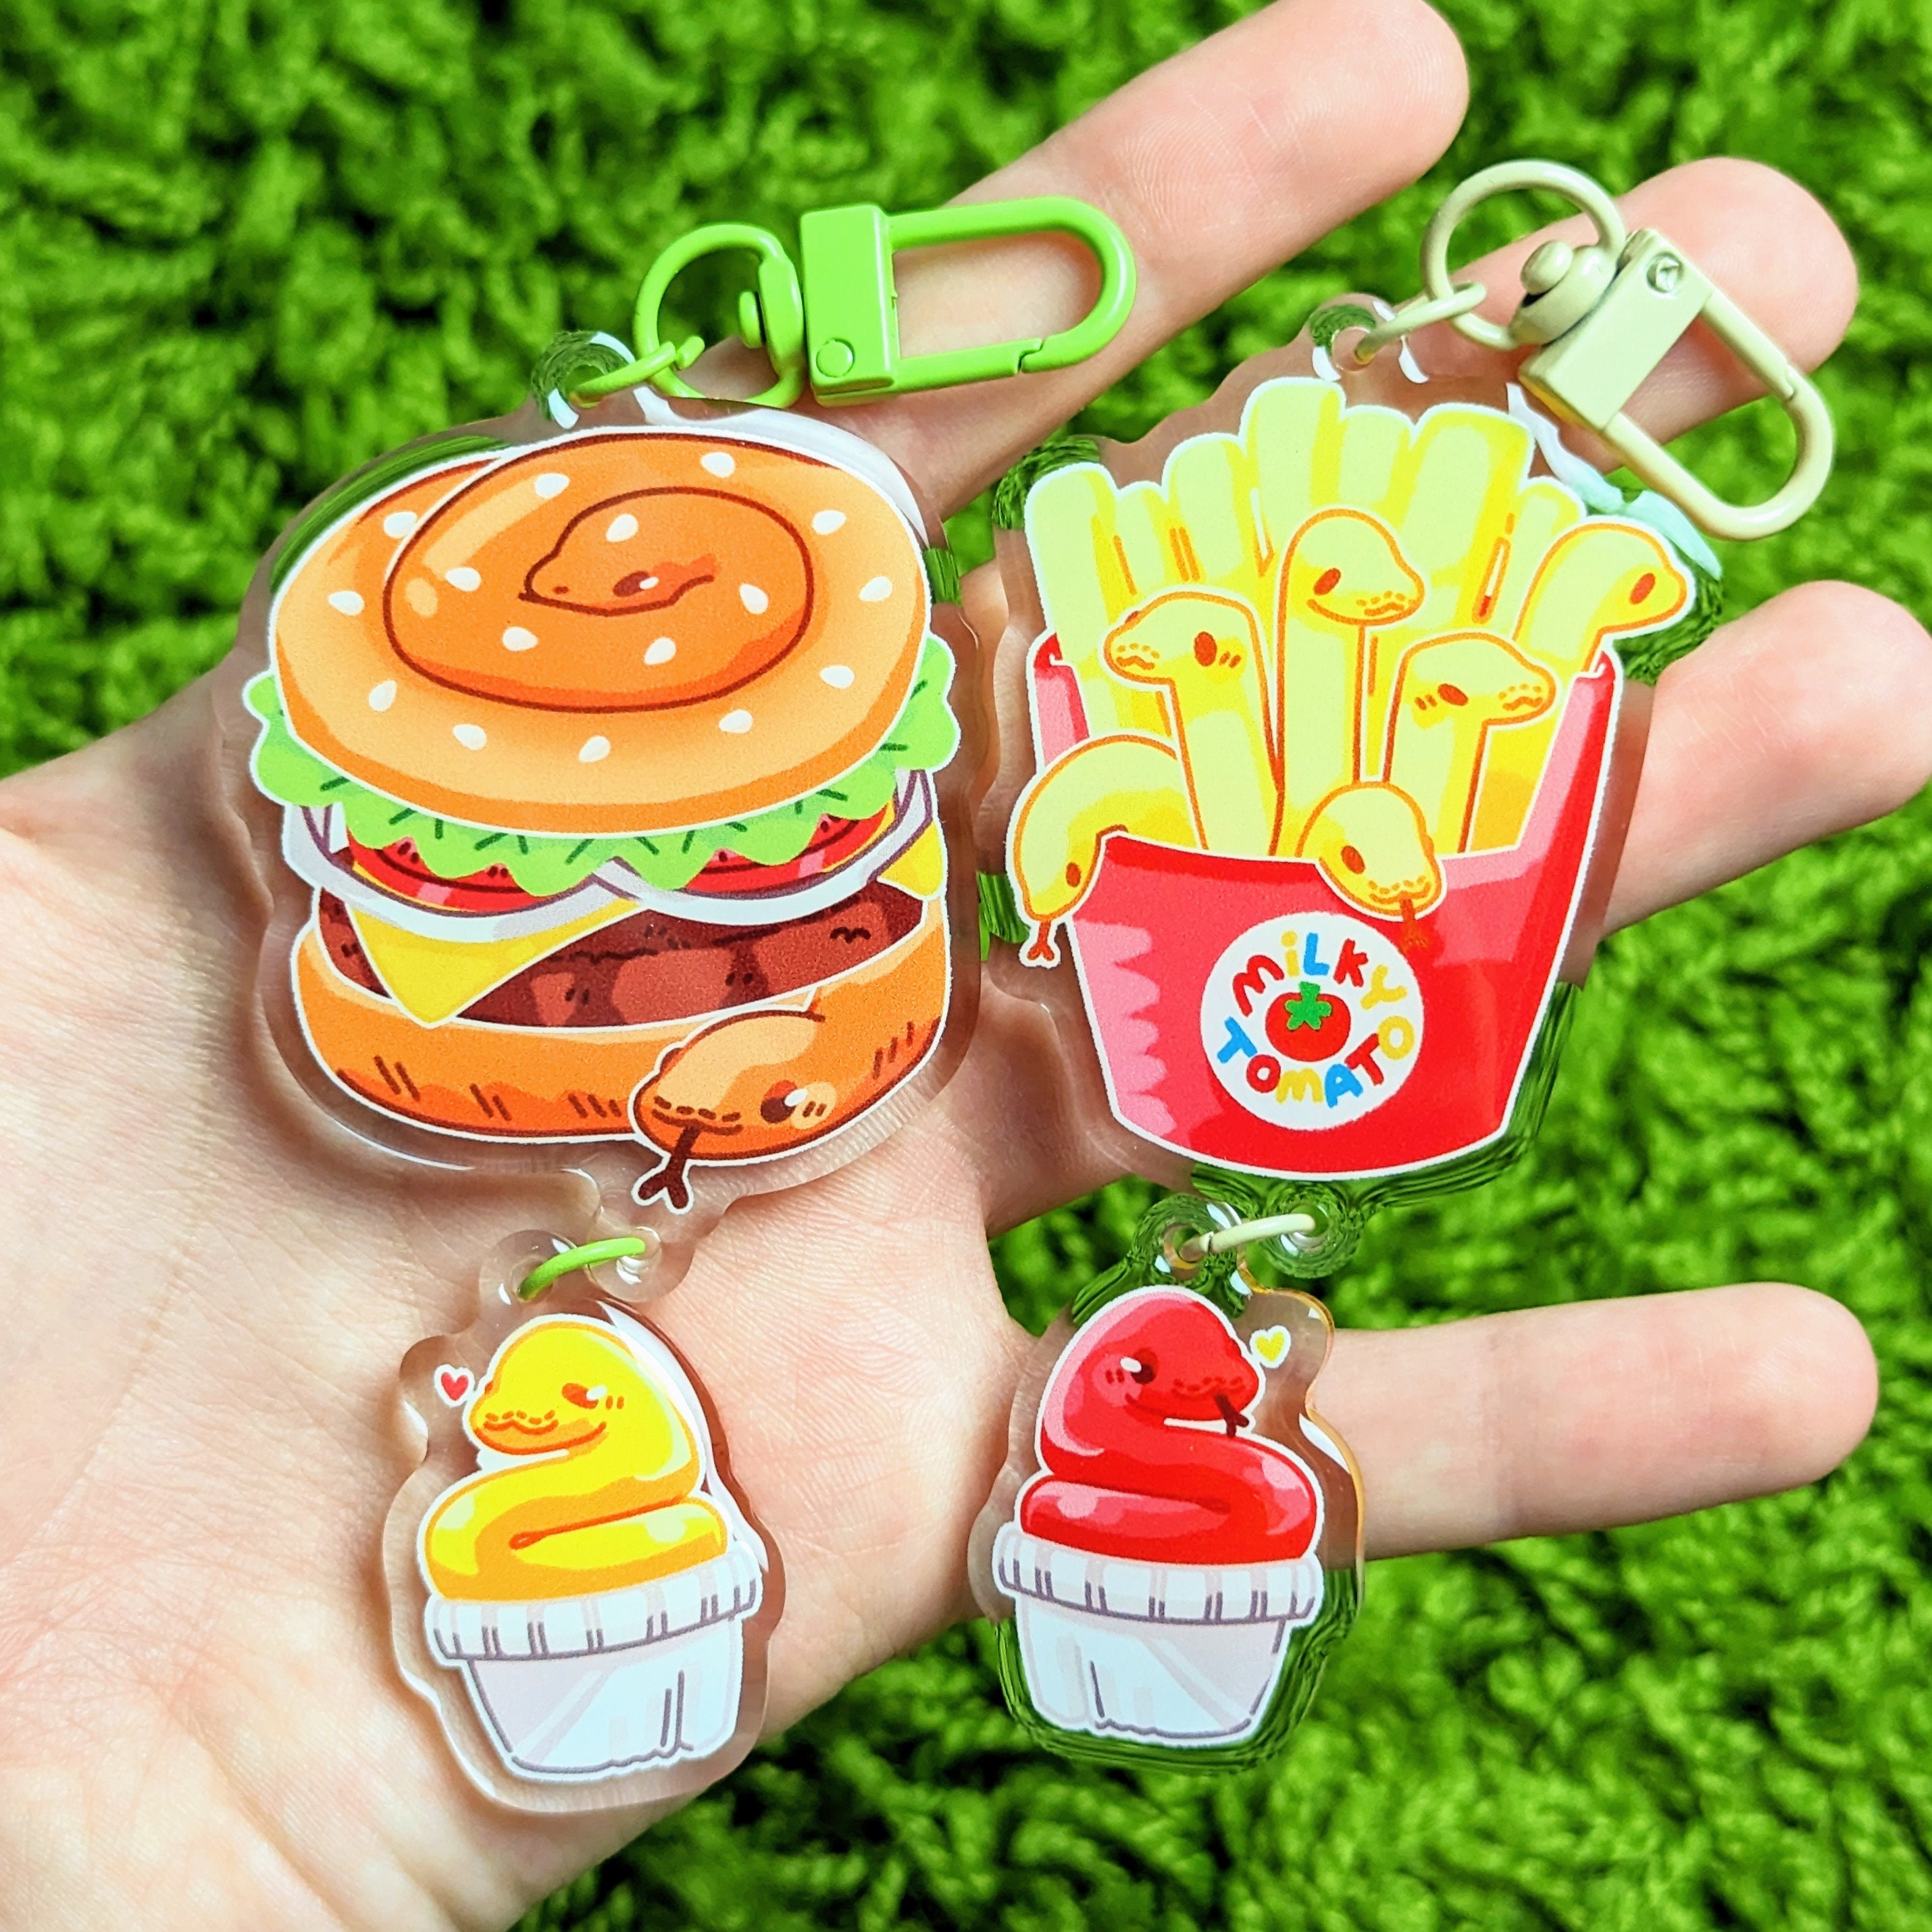 Hot Dogs Keychain - Food Keychain or Funny Keychain that shows a Hot Dog  Keychain with Condiments is a Great Gift for Men or Women who Love a  Novelty